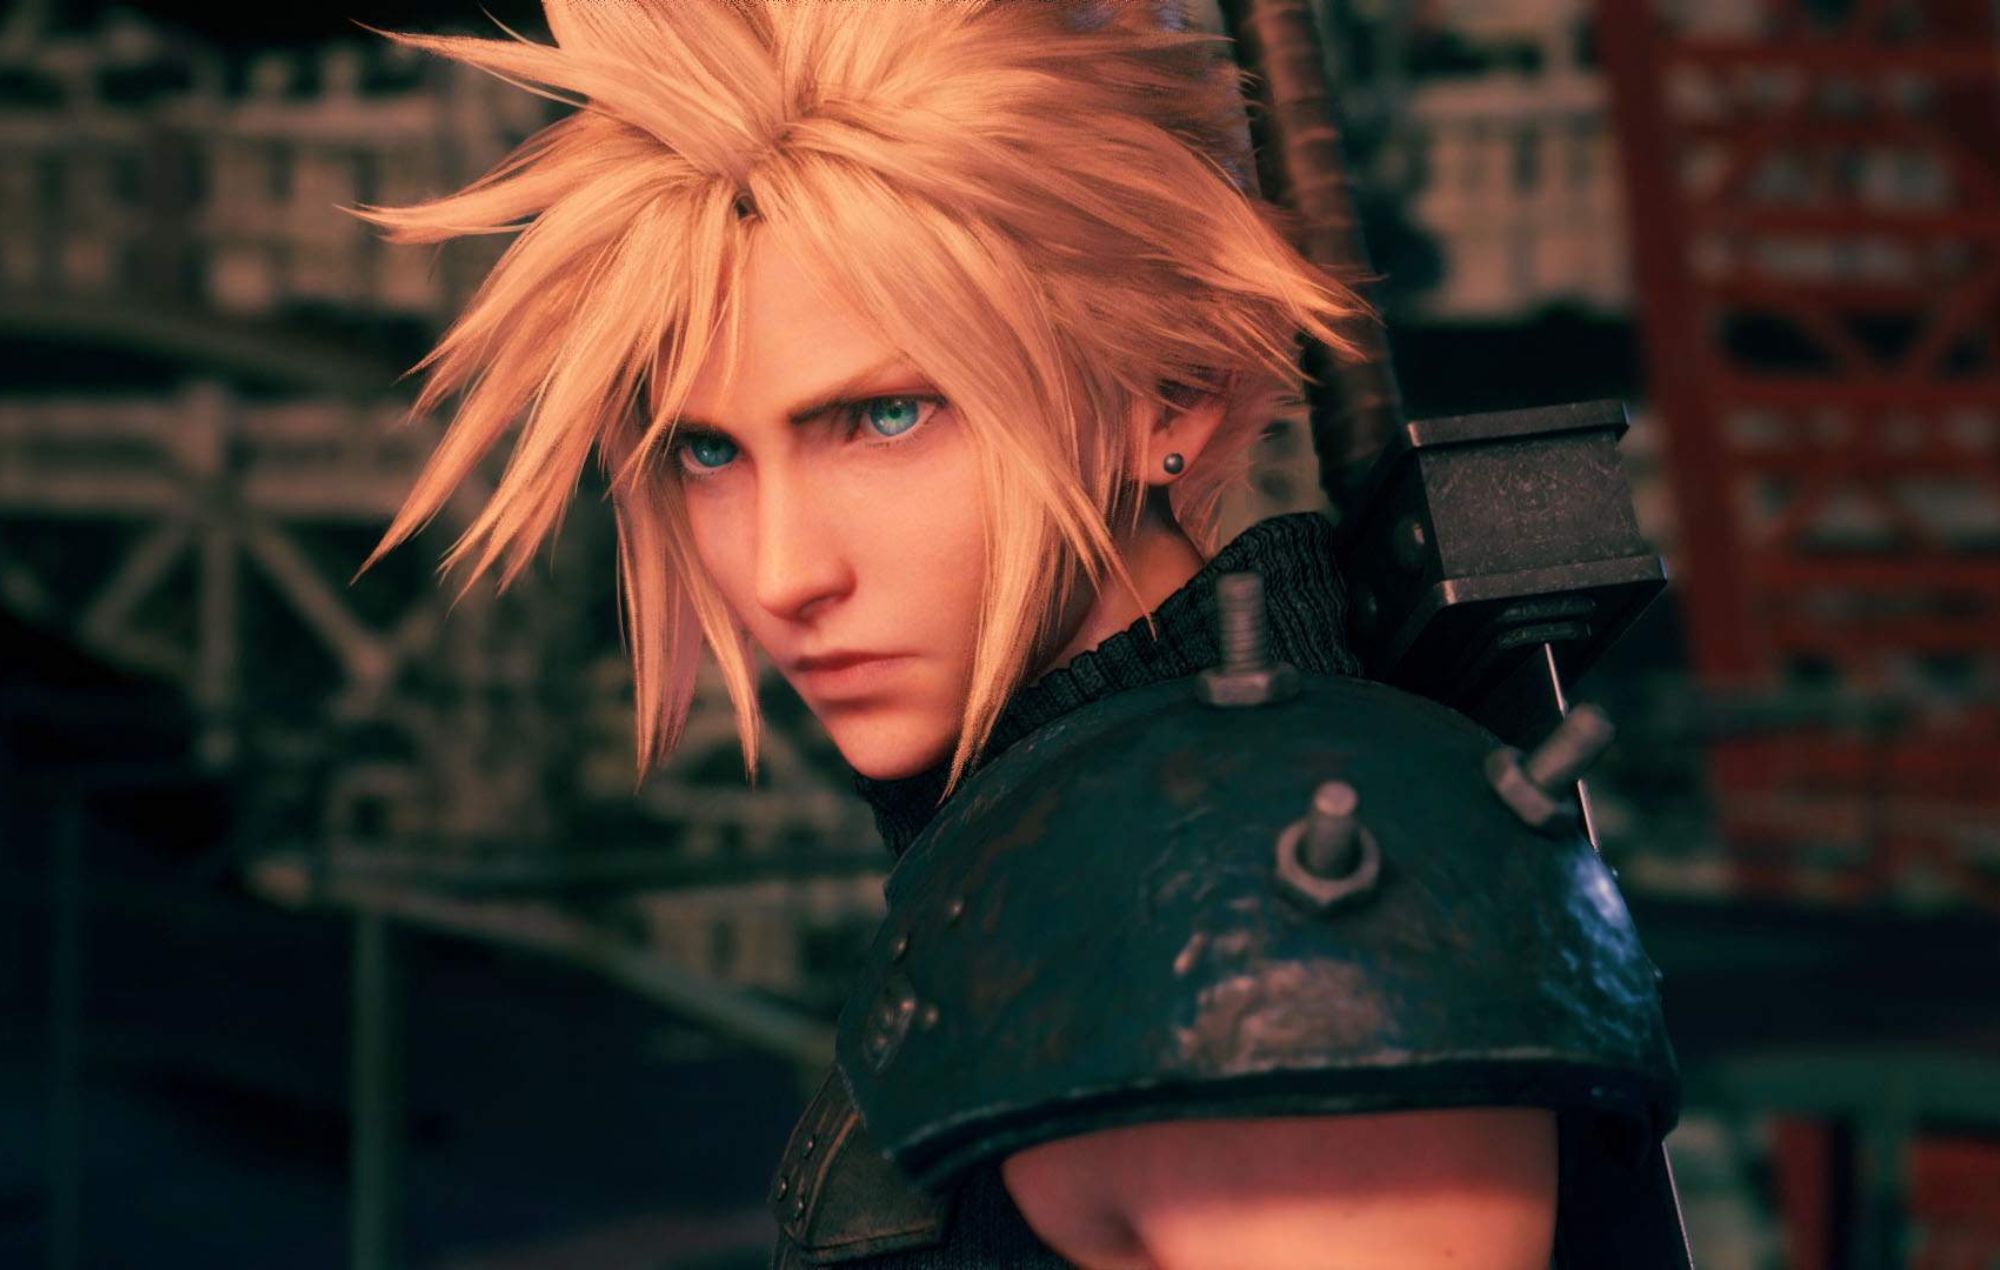 ‘Final Fantasy 7 Remake’ Producer Announces More Changes In Upcoming Installments